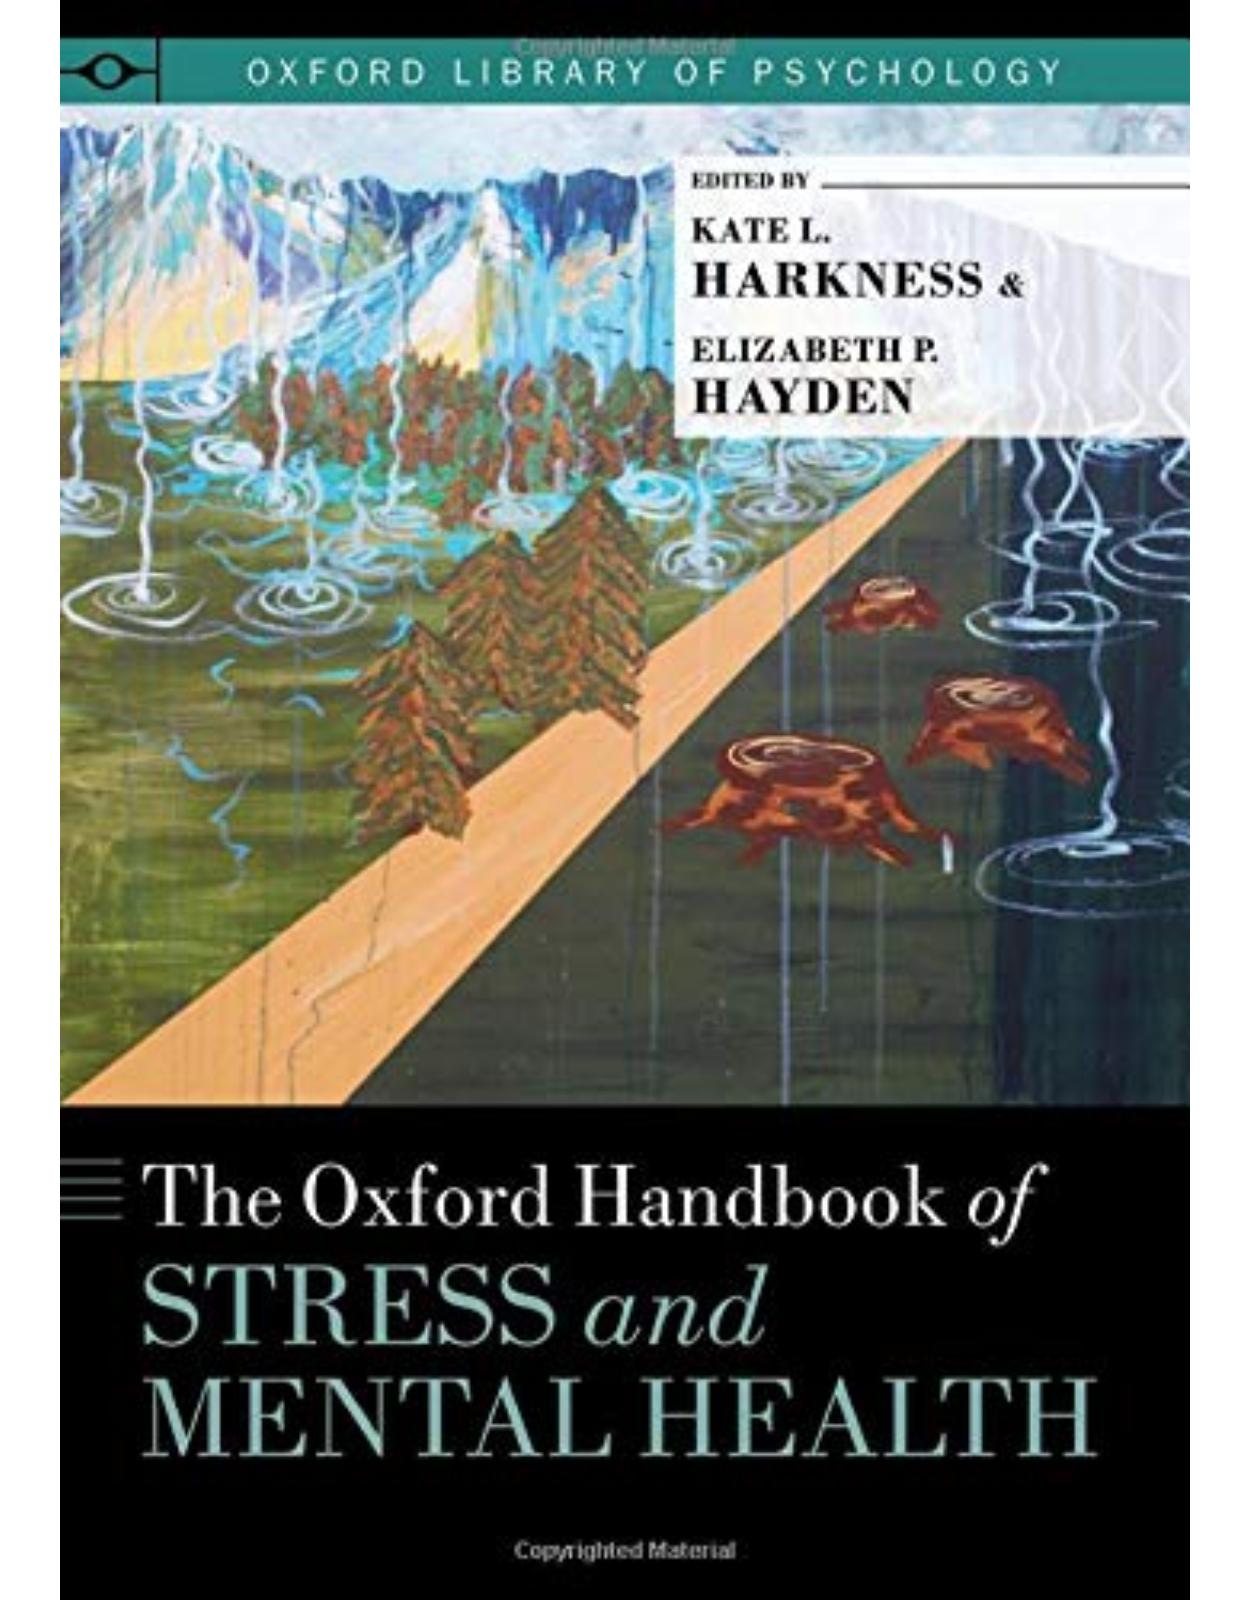 The Oxford Handbook of Stress and Mental Health